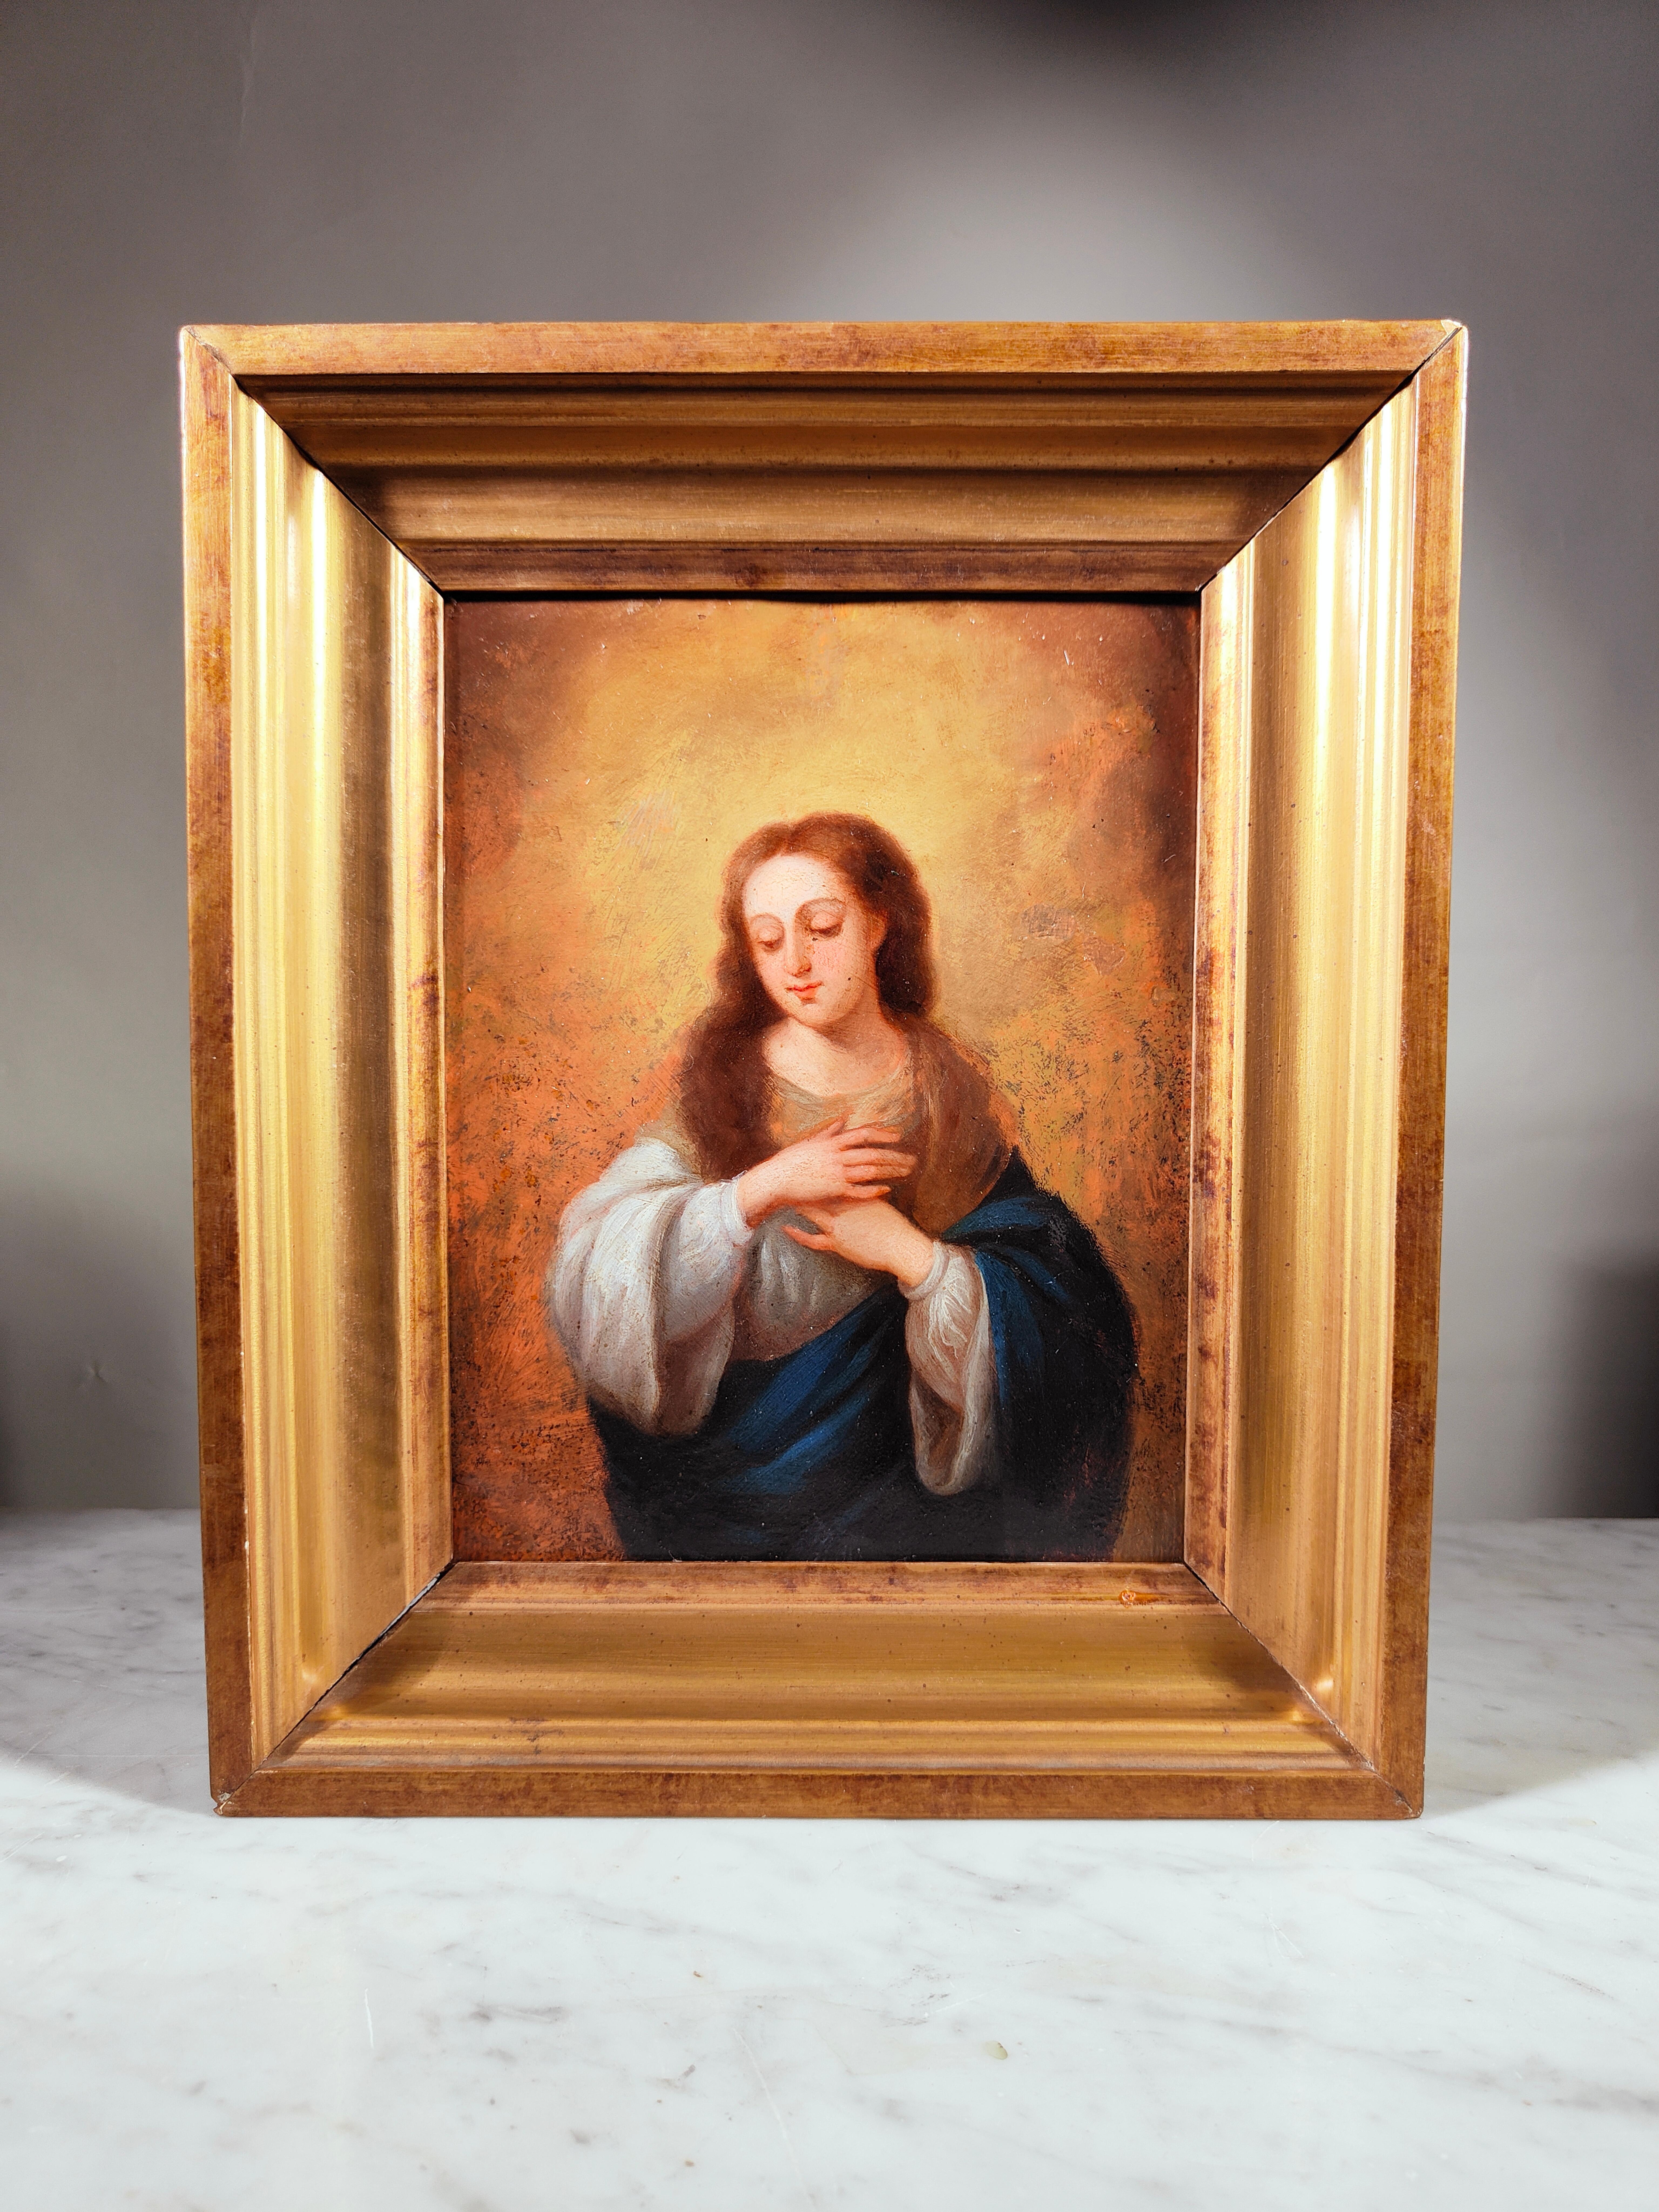 Oil On Copper, 17th Century
ELEGANT OIL ON COPPER REPRESENTING THE VIRGIN MARY SPANISH SCHOOL OF THE 17TH CENTURY VERY WELL PRESERVED CONDITION GILT WOOD FRAME MEASURES: 32X27 CM AND 24X18 CM